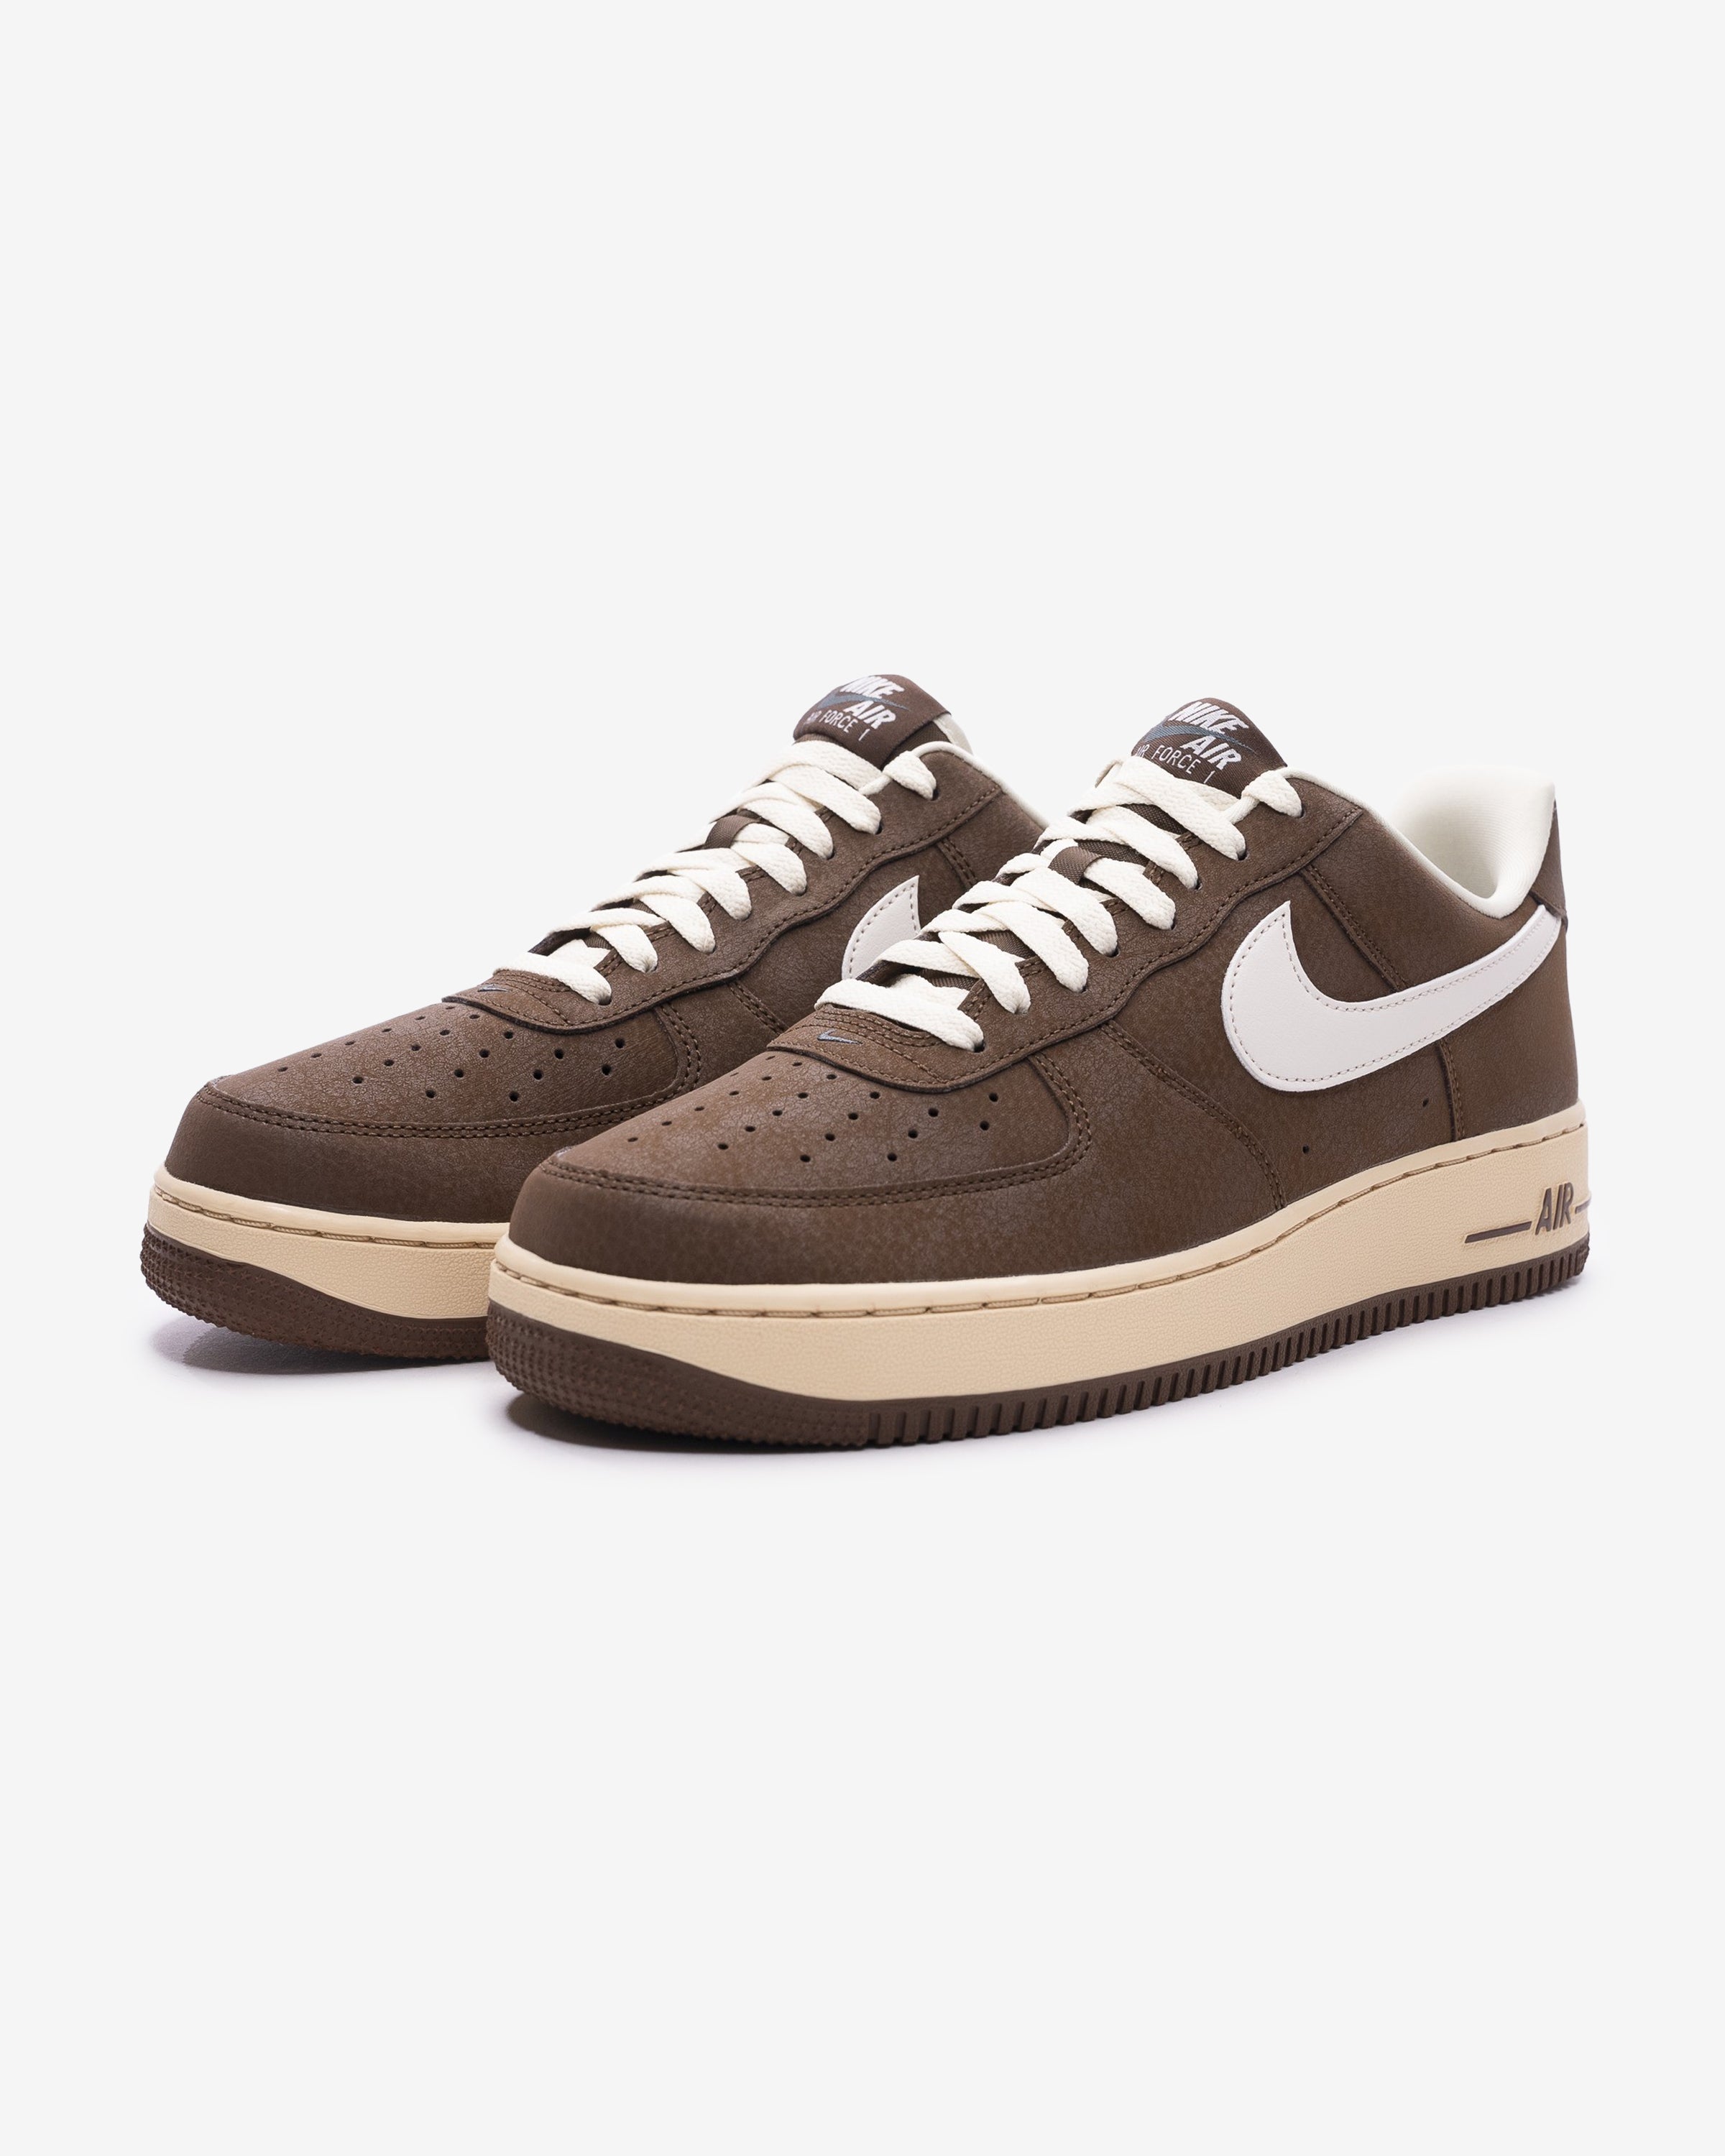 NIKE AIR FORCE 1 '07 – UNDEFEATED JAPAN